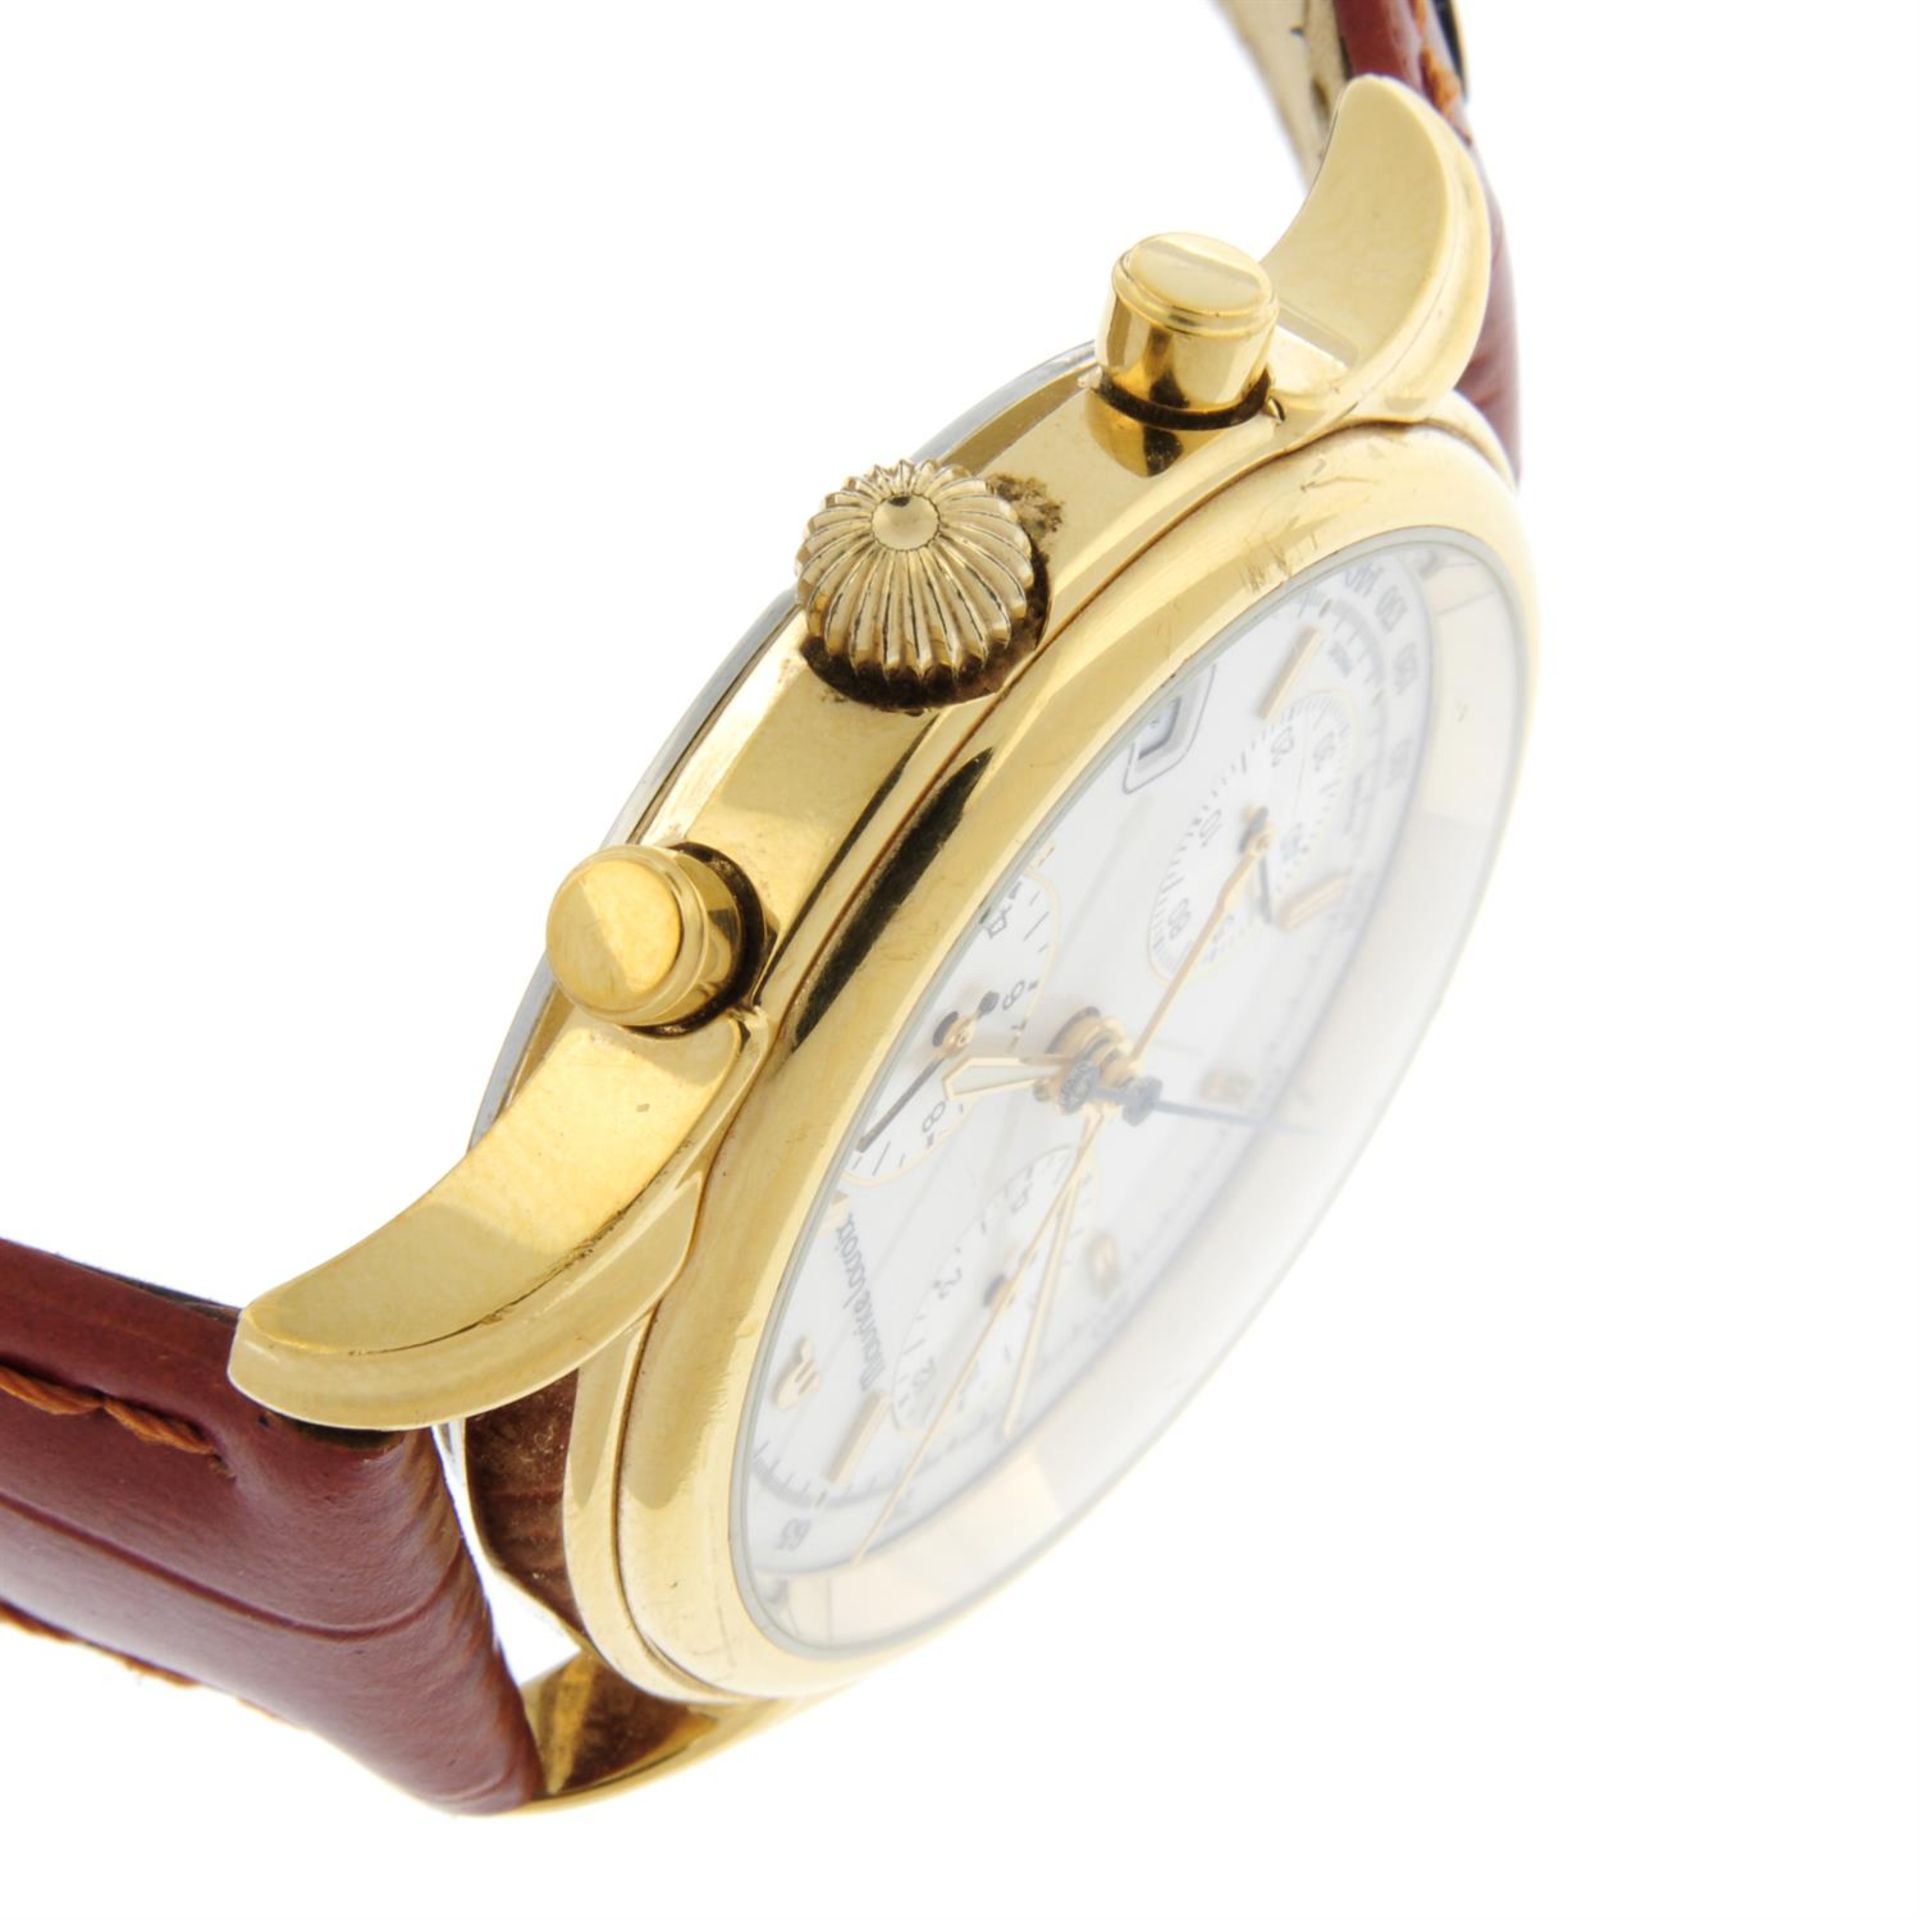 MAURICE LACROIX - a gold plated chronograph wrist watch, 37mm. - Image 3 of 4